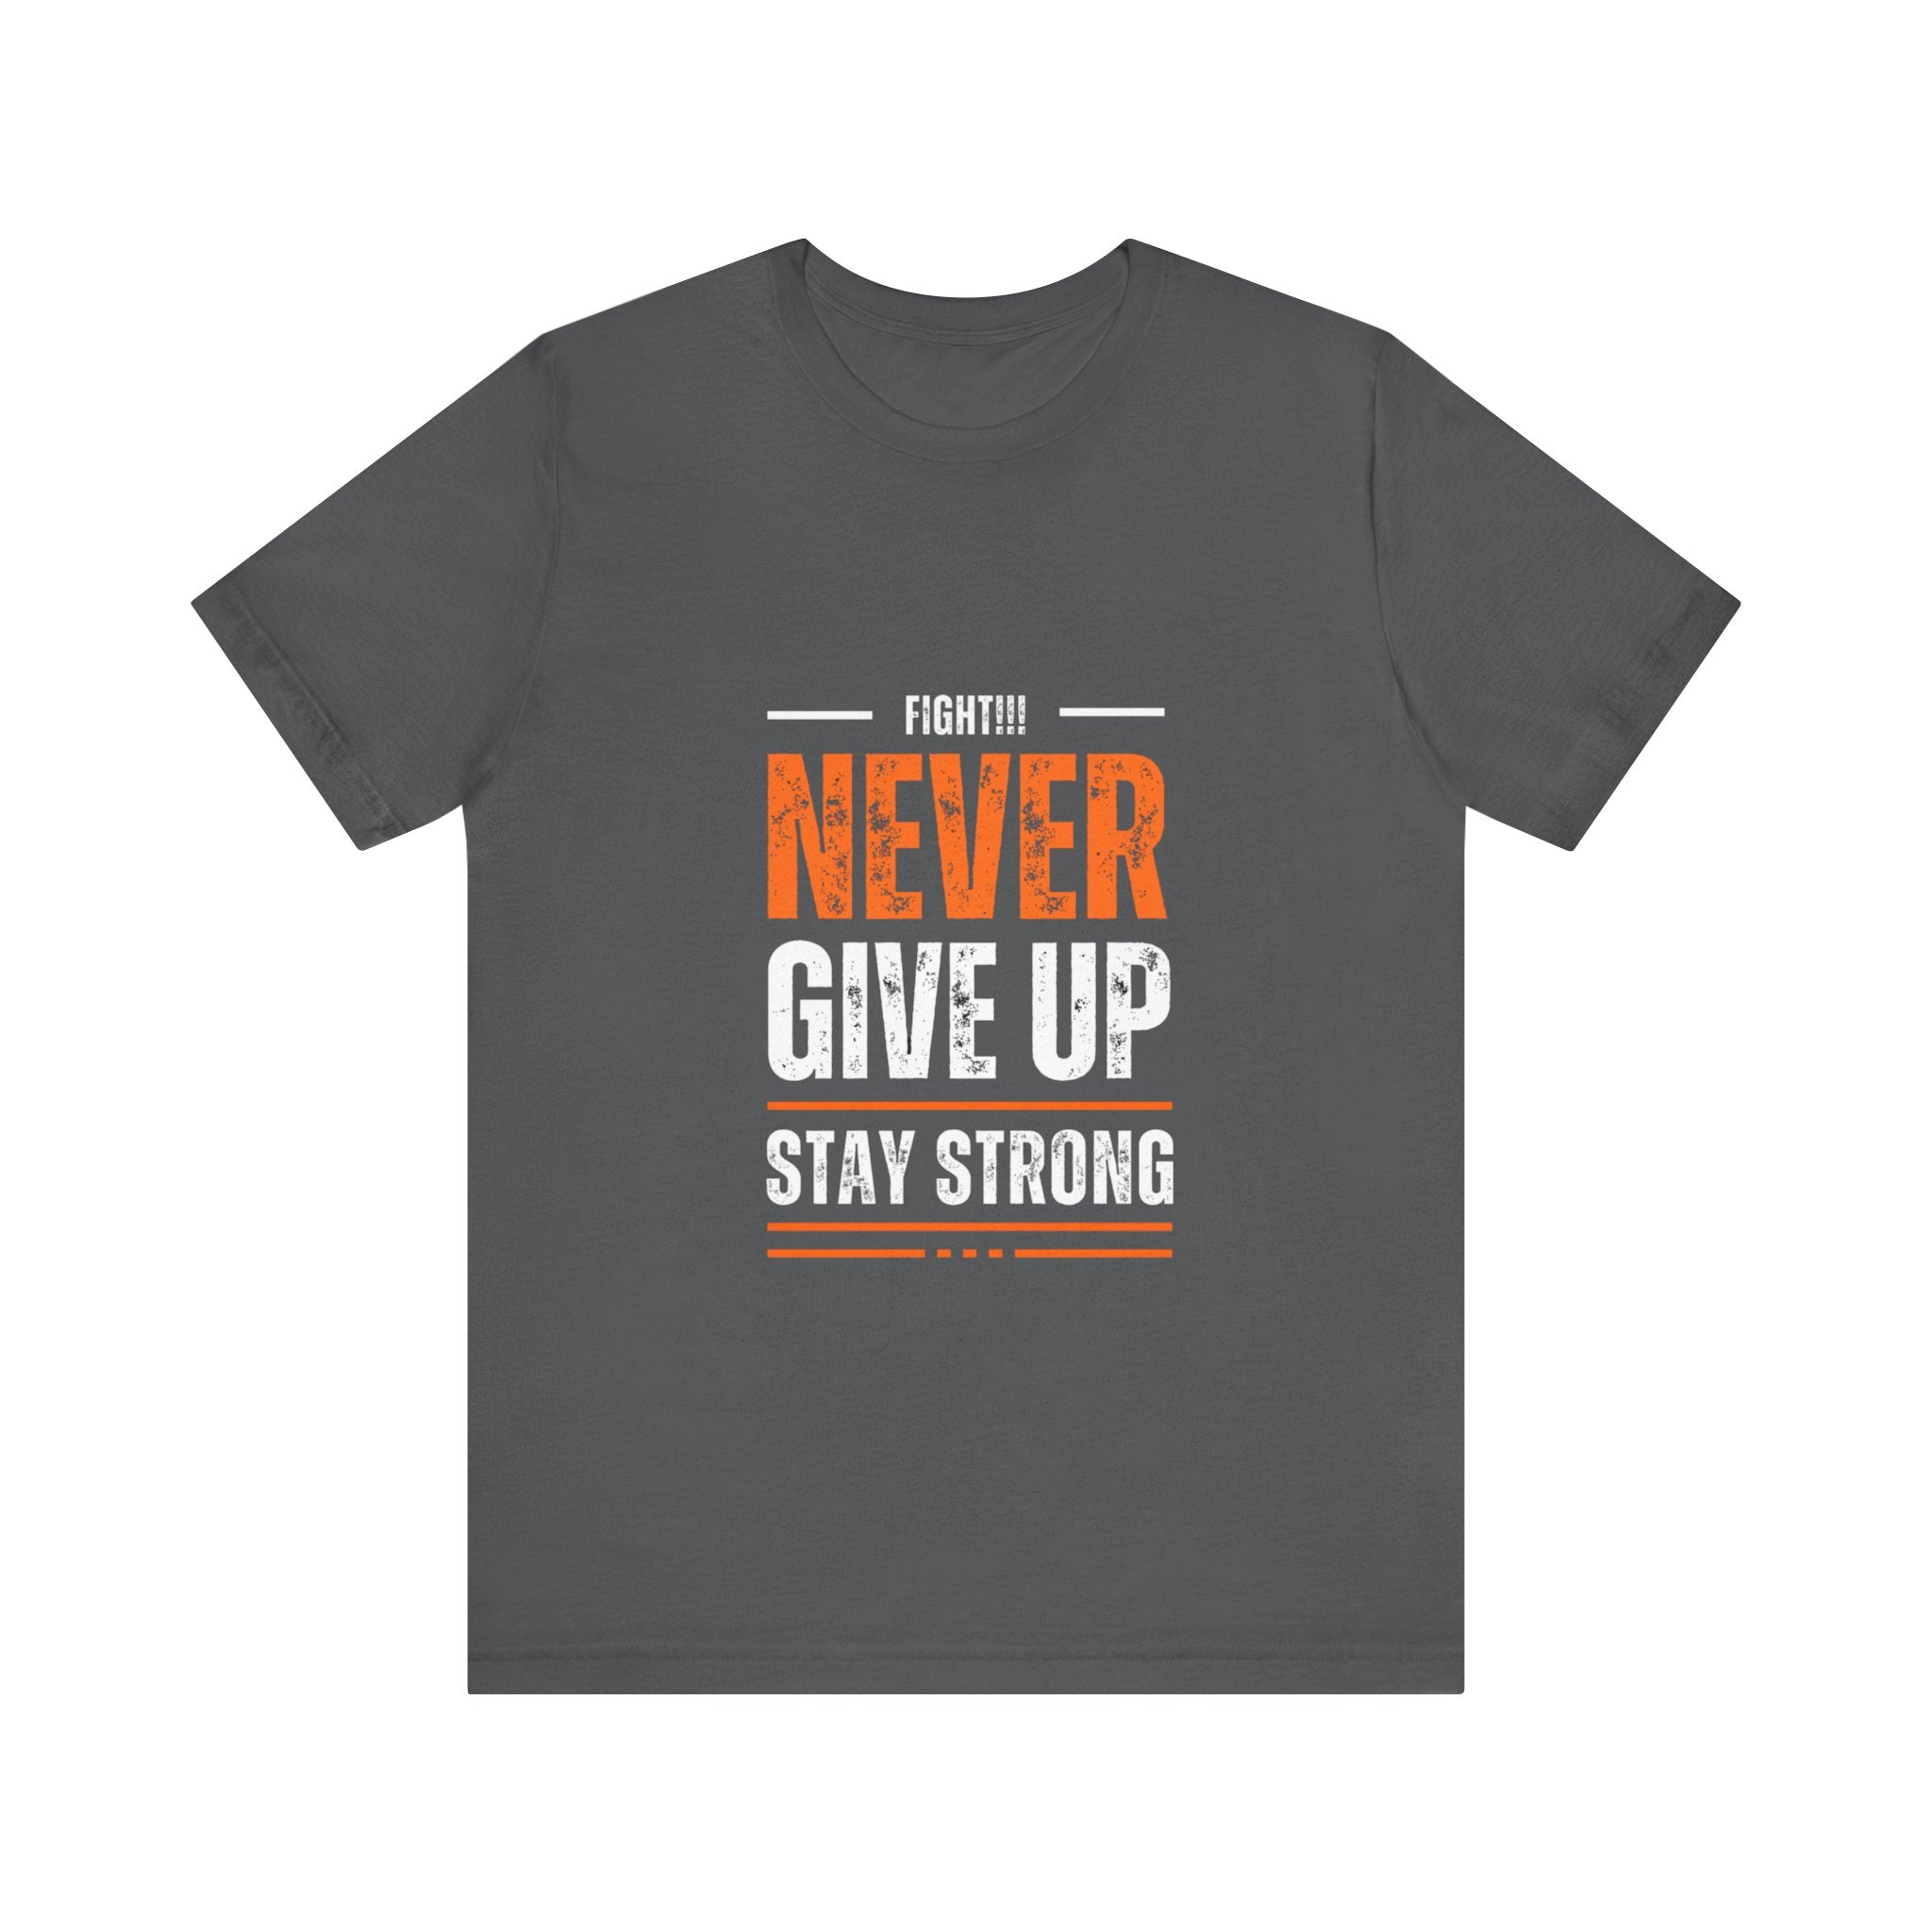 Never Give Up Unisex Jersey Tee, Women's Clothing, Men's Crew Neck T-shirt, DTG Printed, Regular Fit